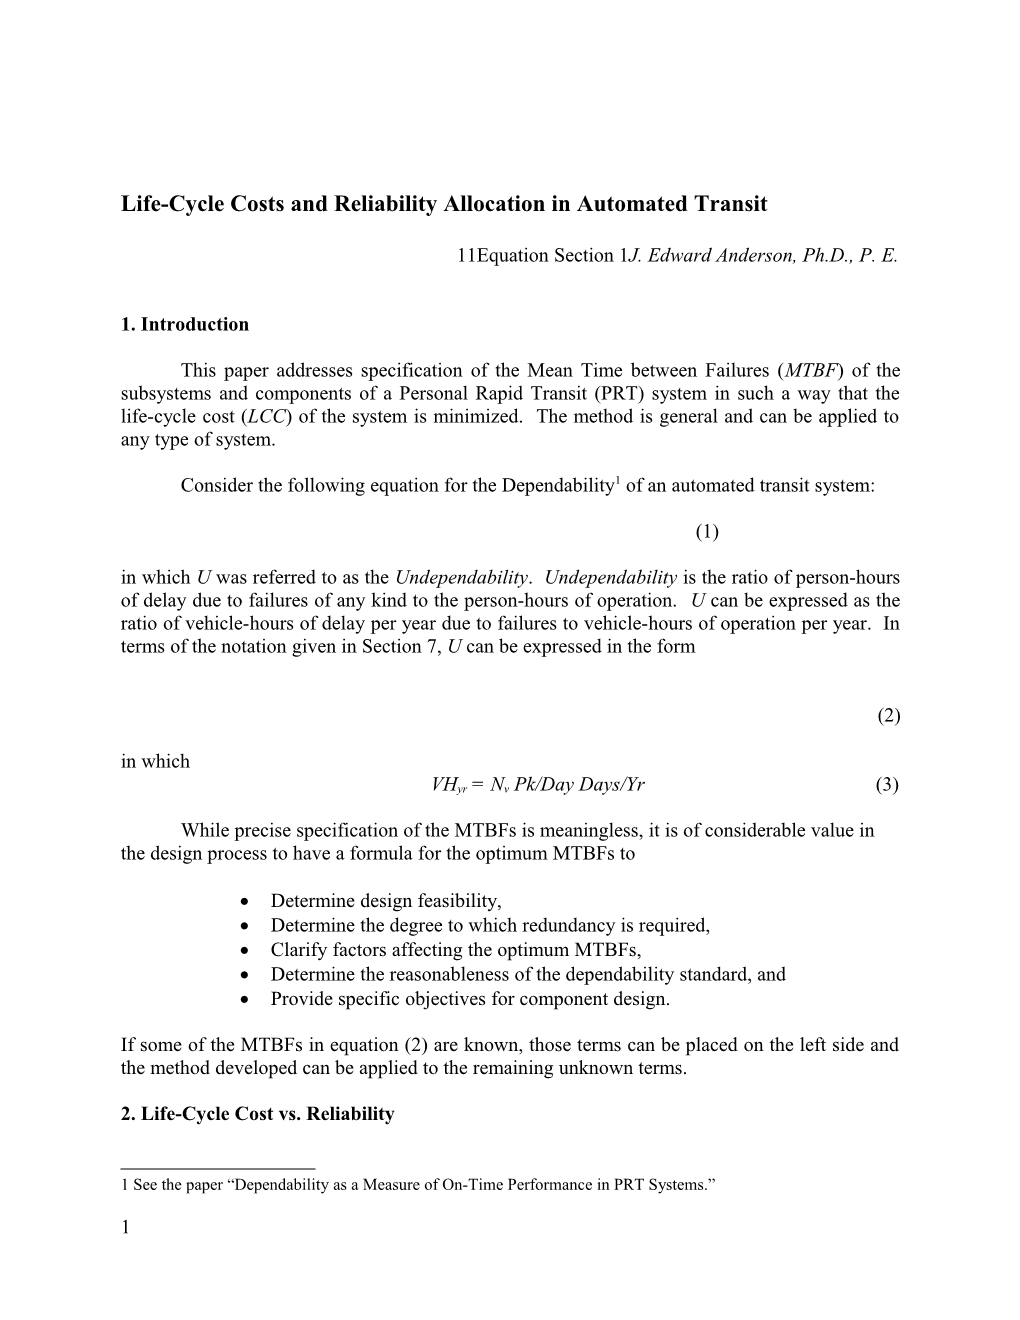 Life-Cycle Costs and Reliability Allocation in Automated Transit